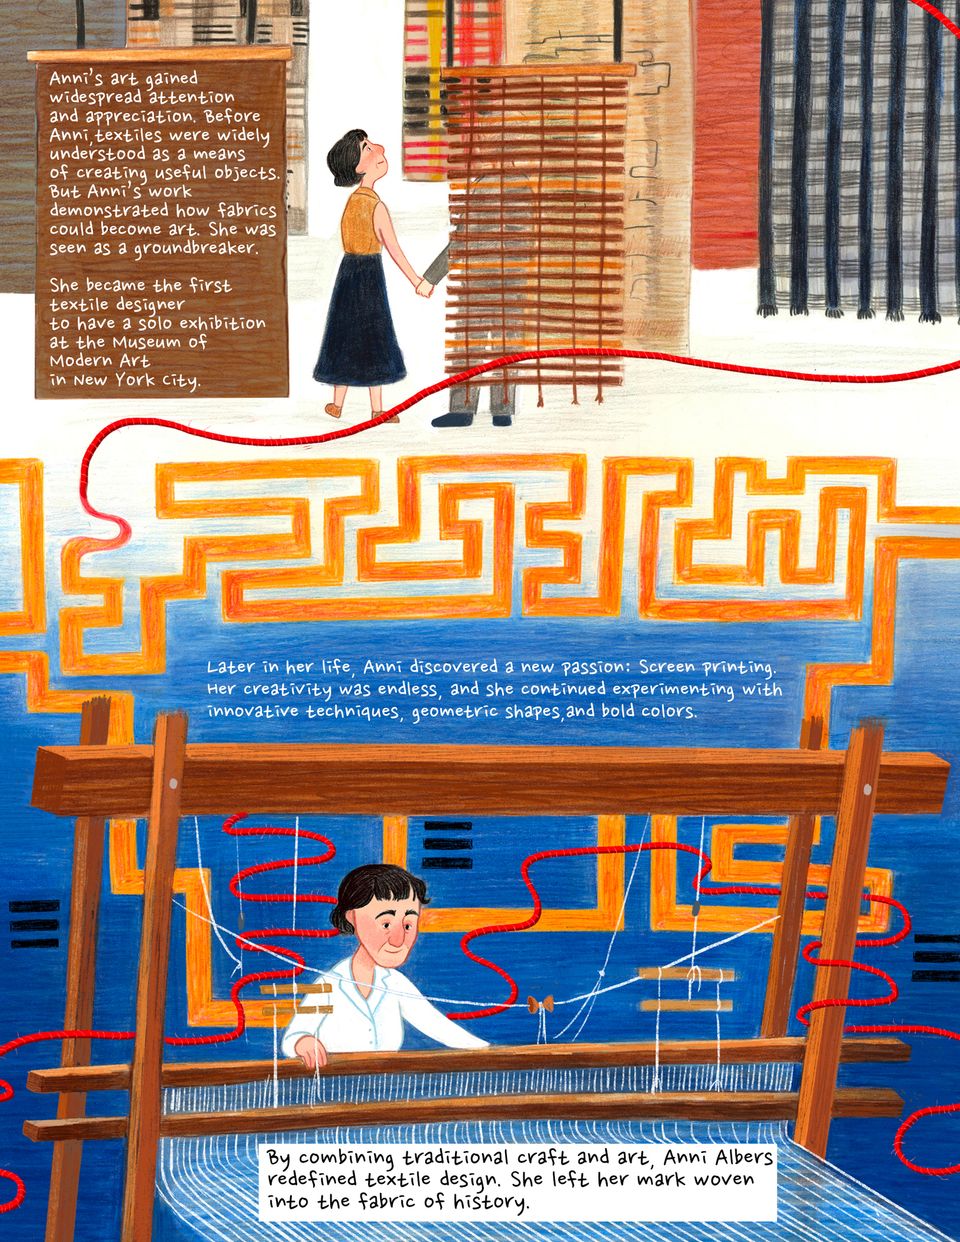 Threads of History: A Comic About Anni Albers, Page three